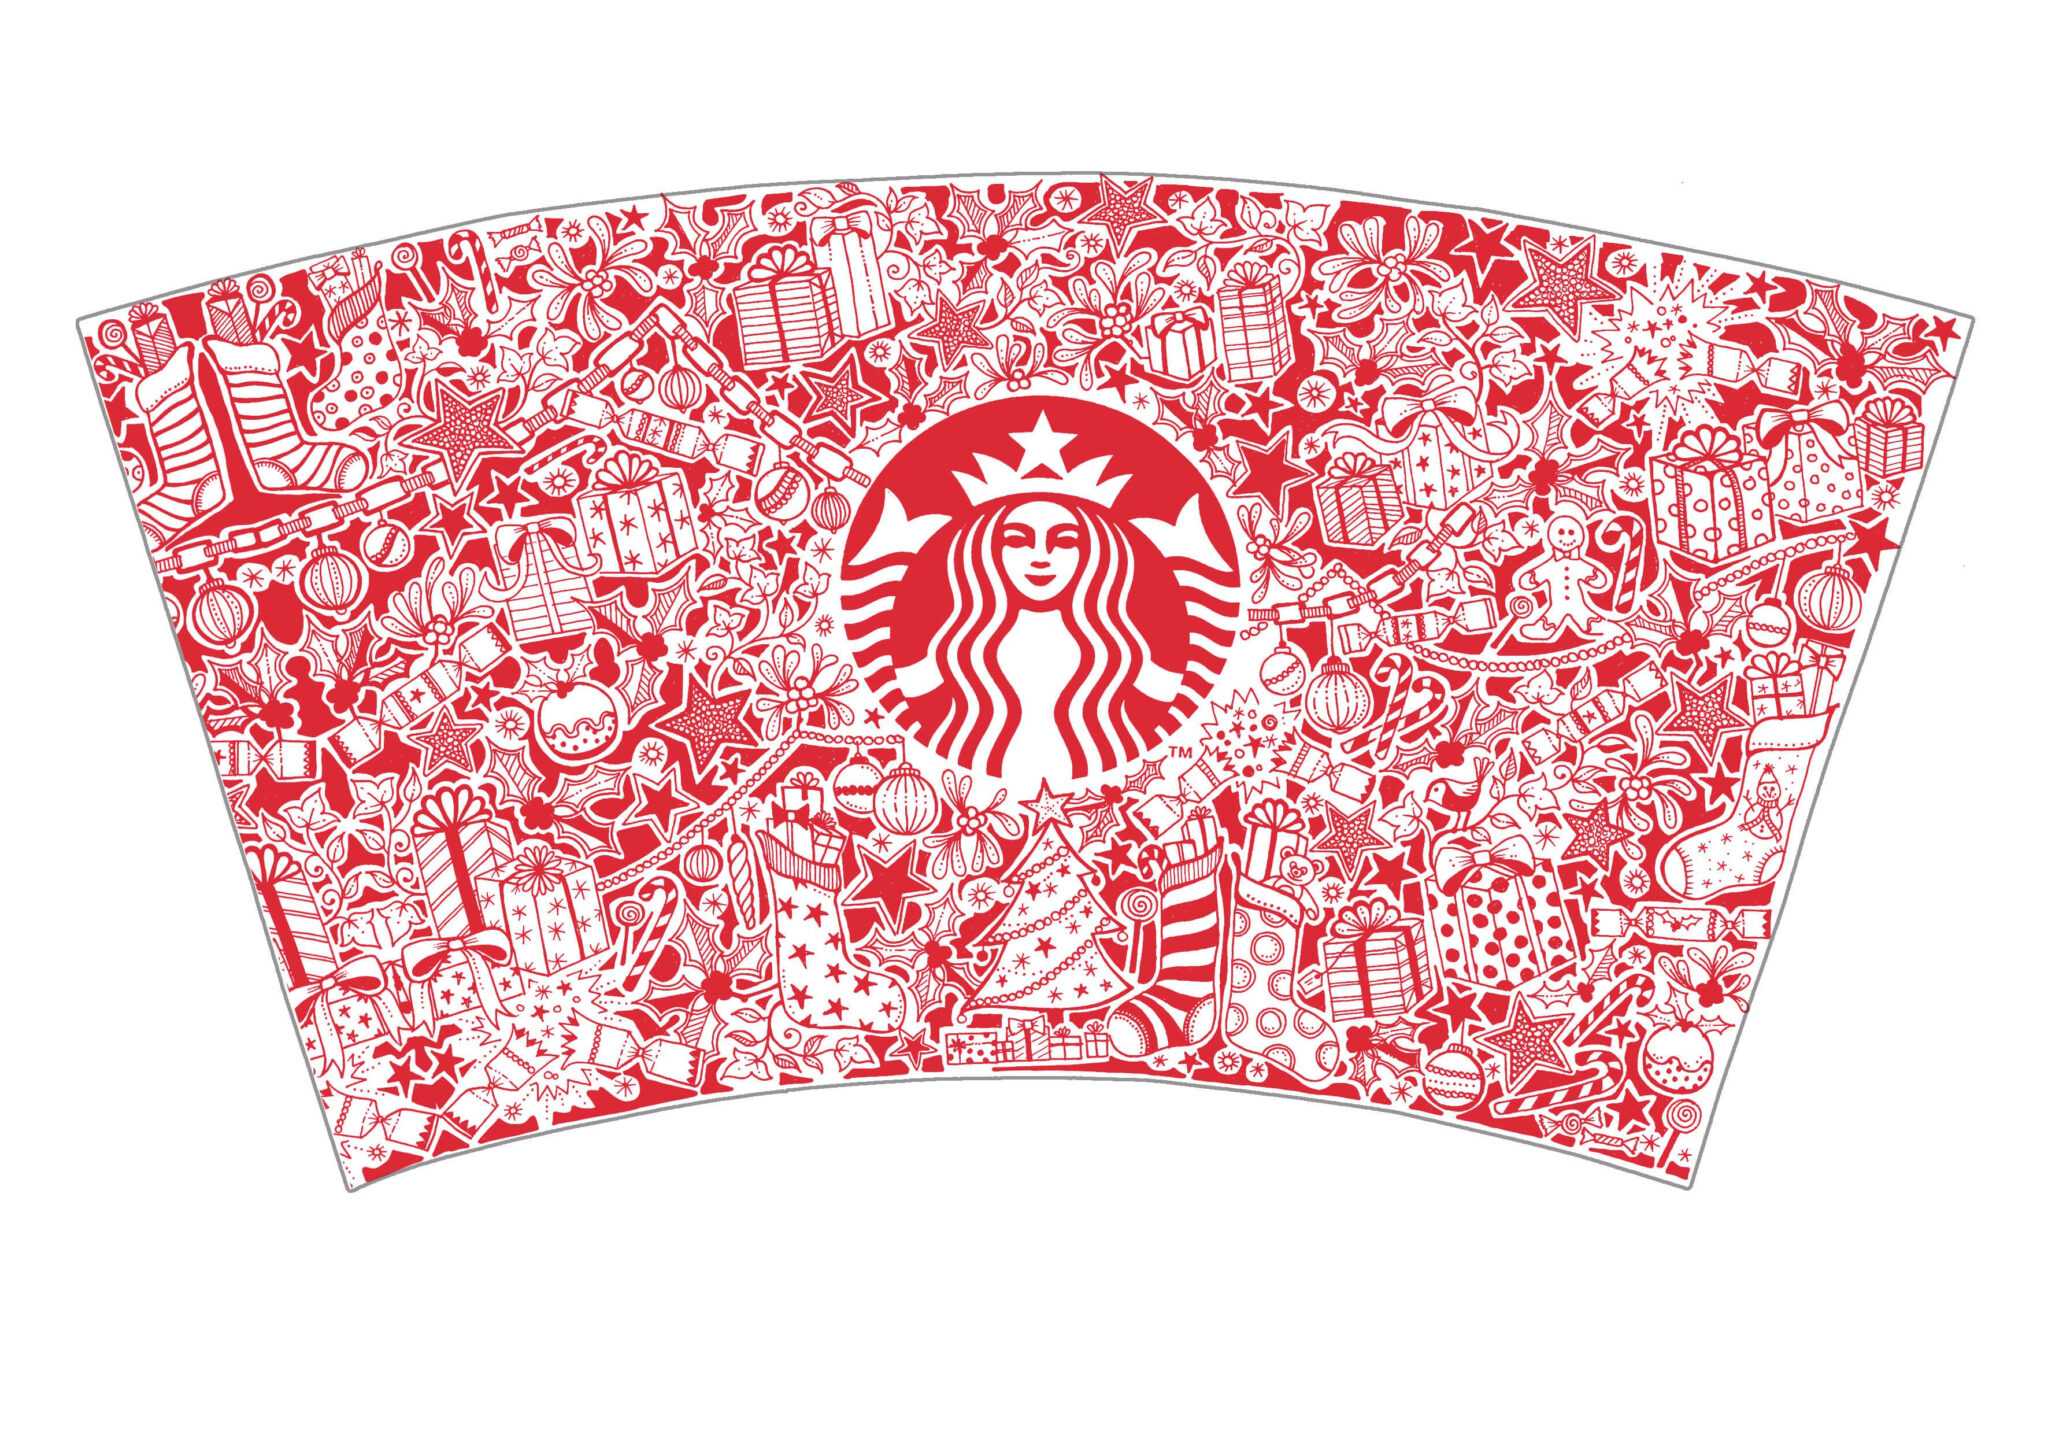 29-images-of-starbucks-coffee-cup-template-infovia-throughout-starbucks-create-your-own